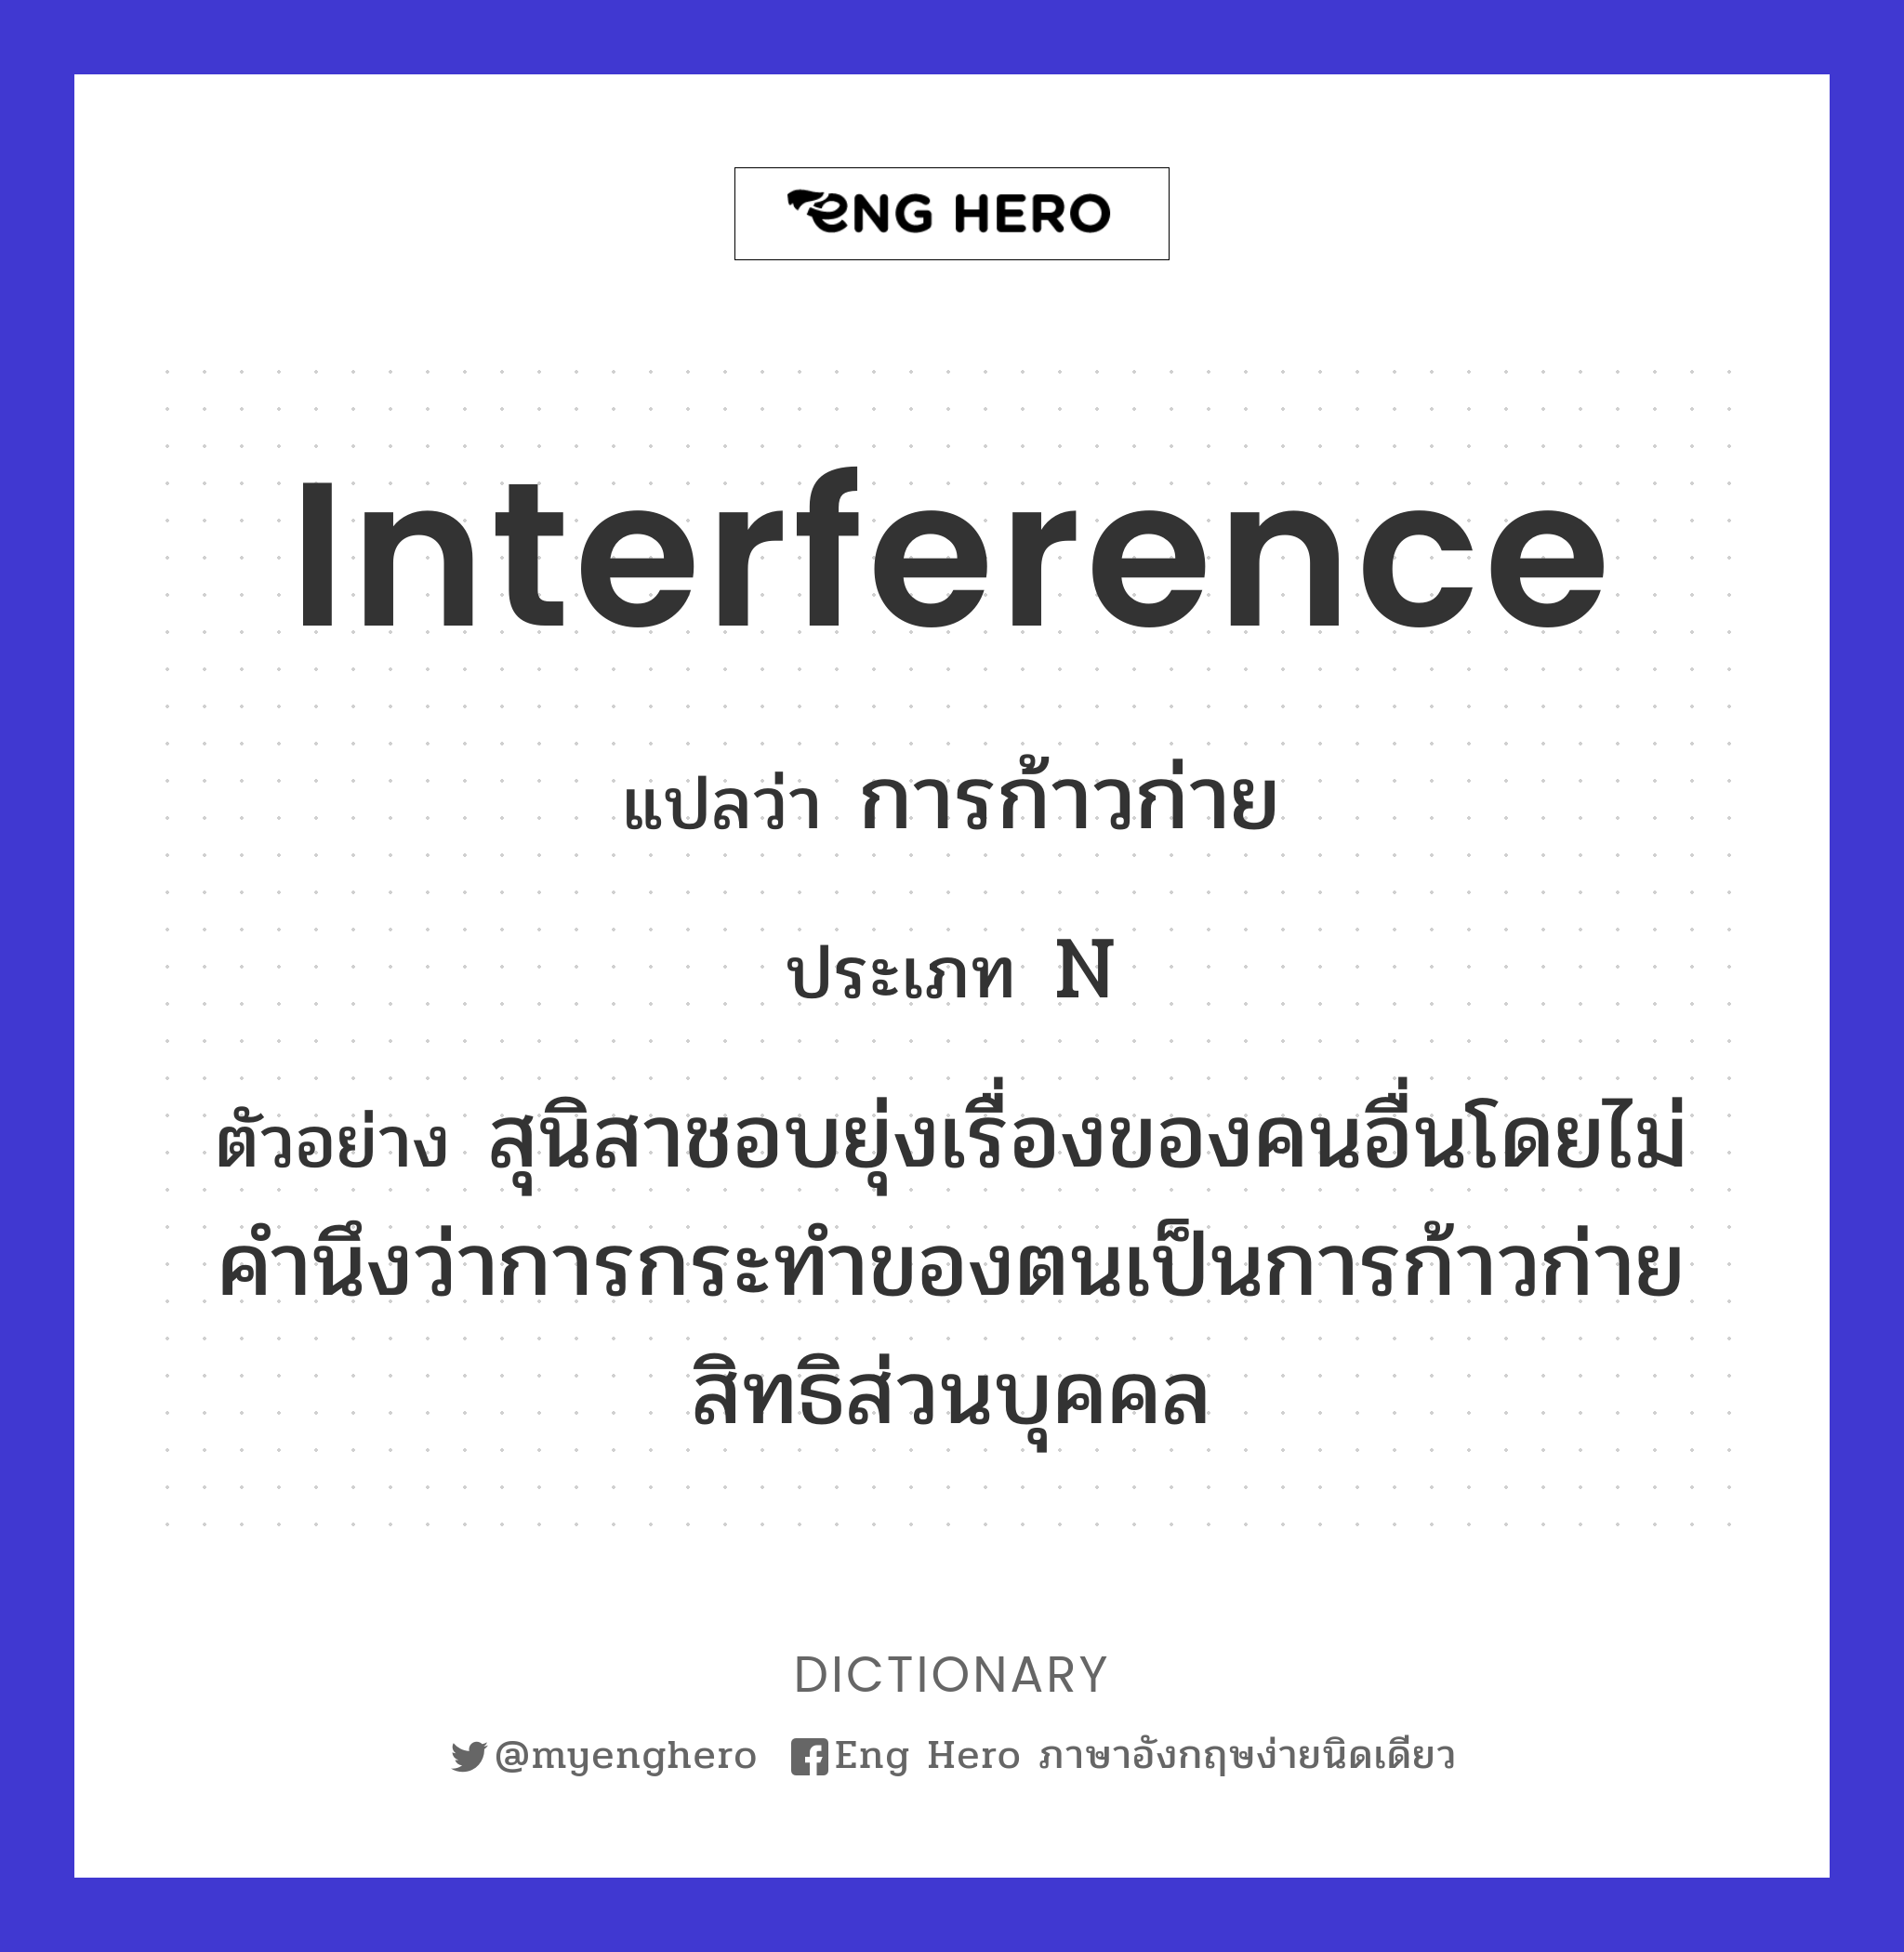 interference